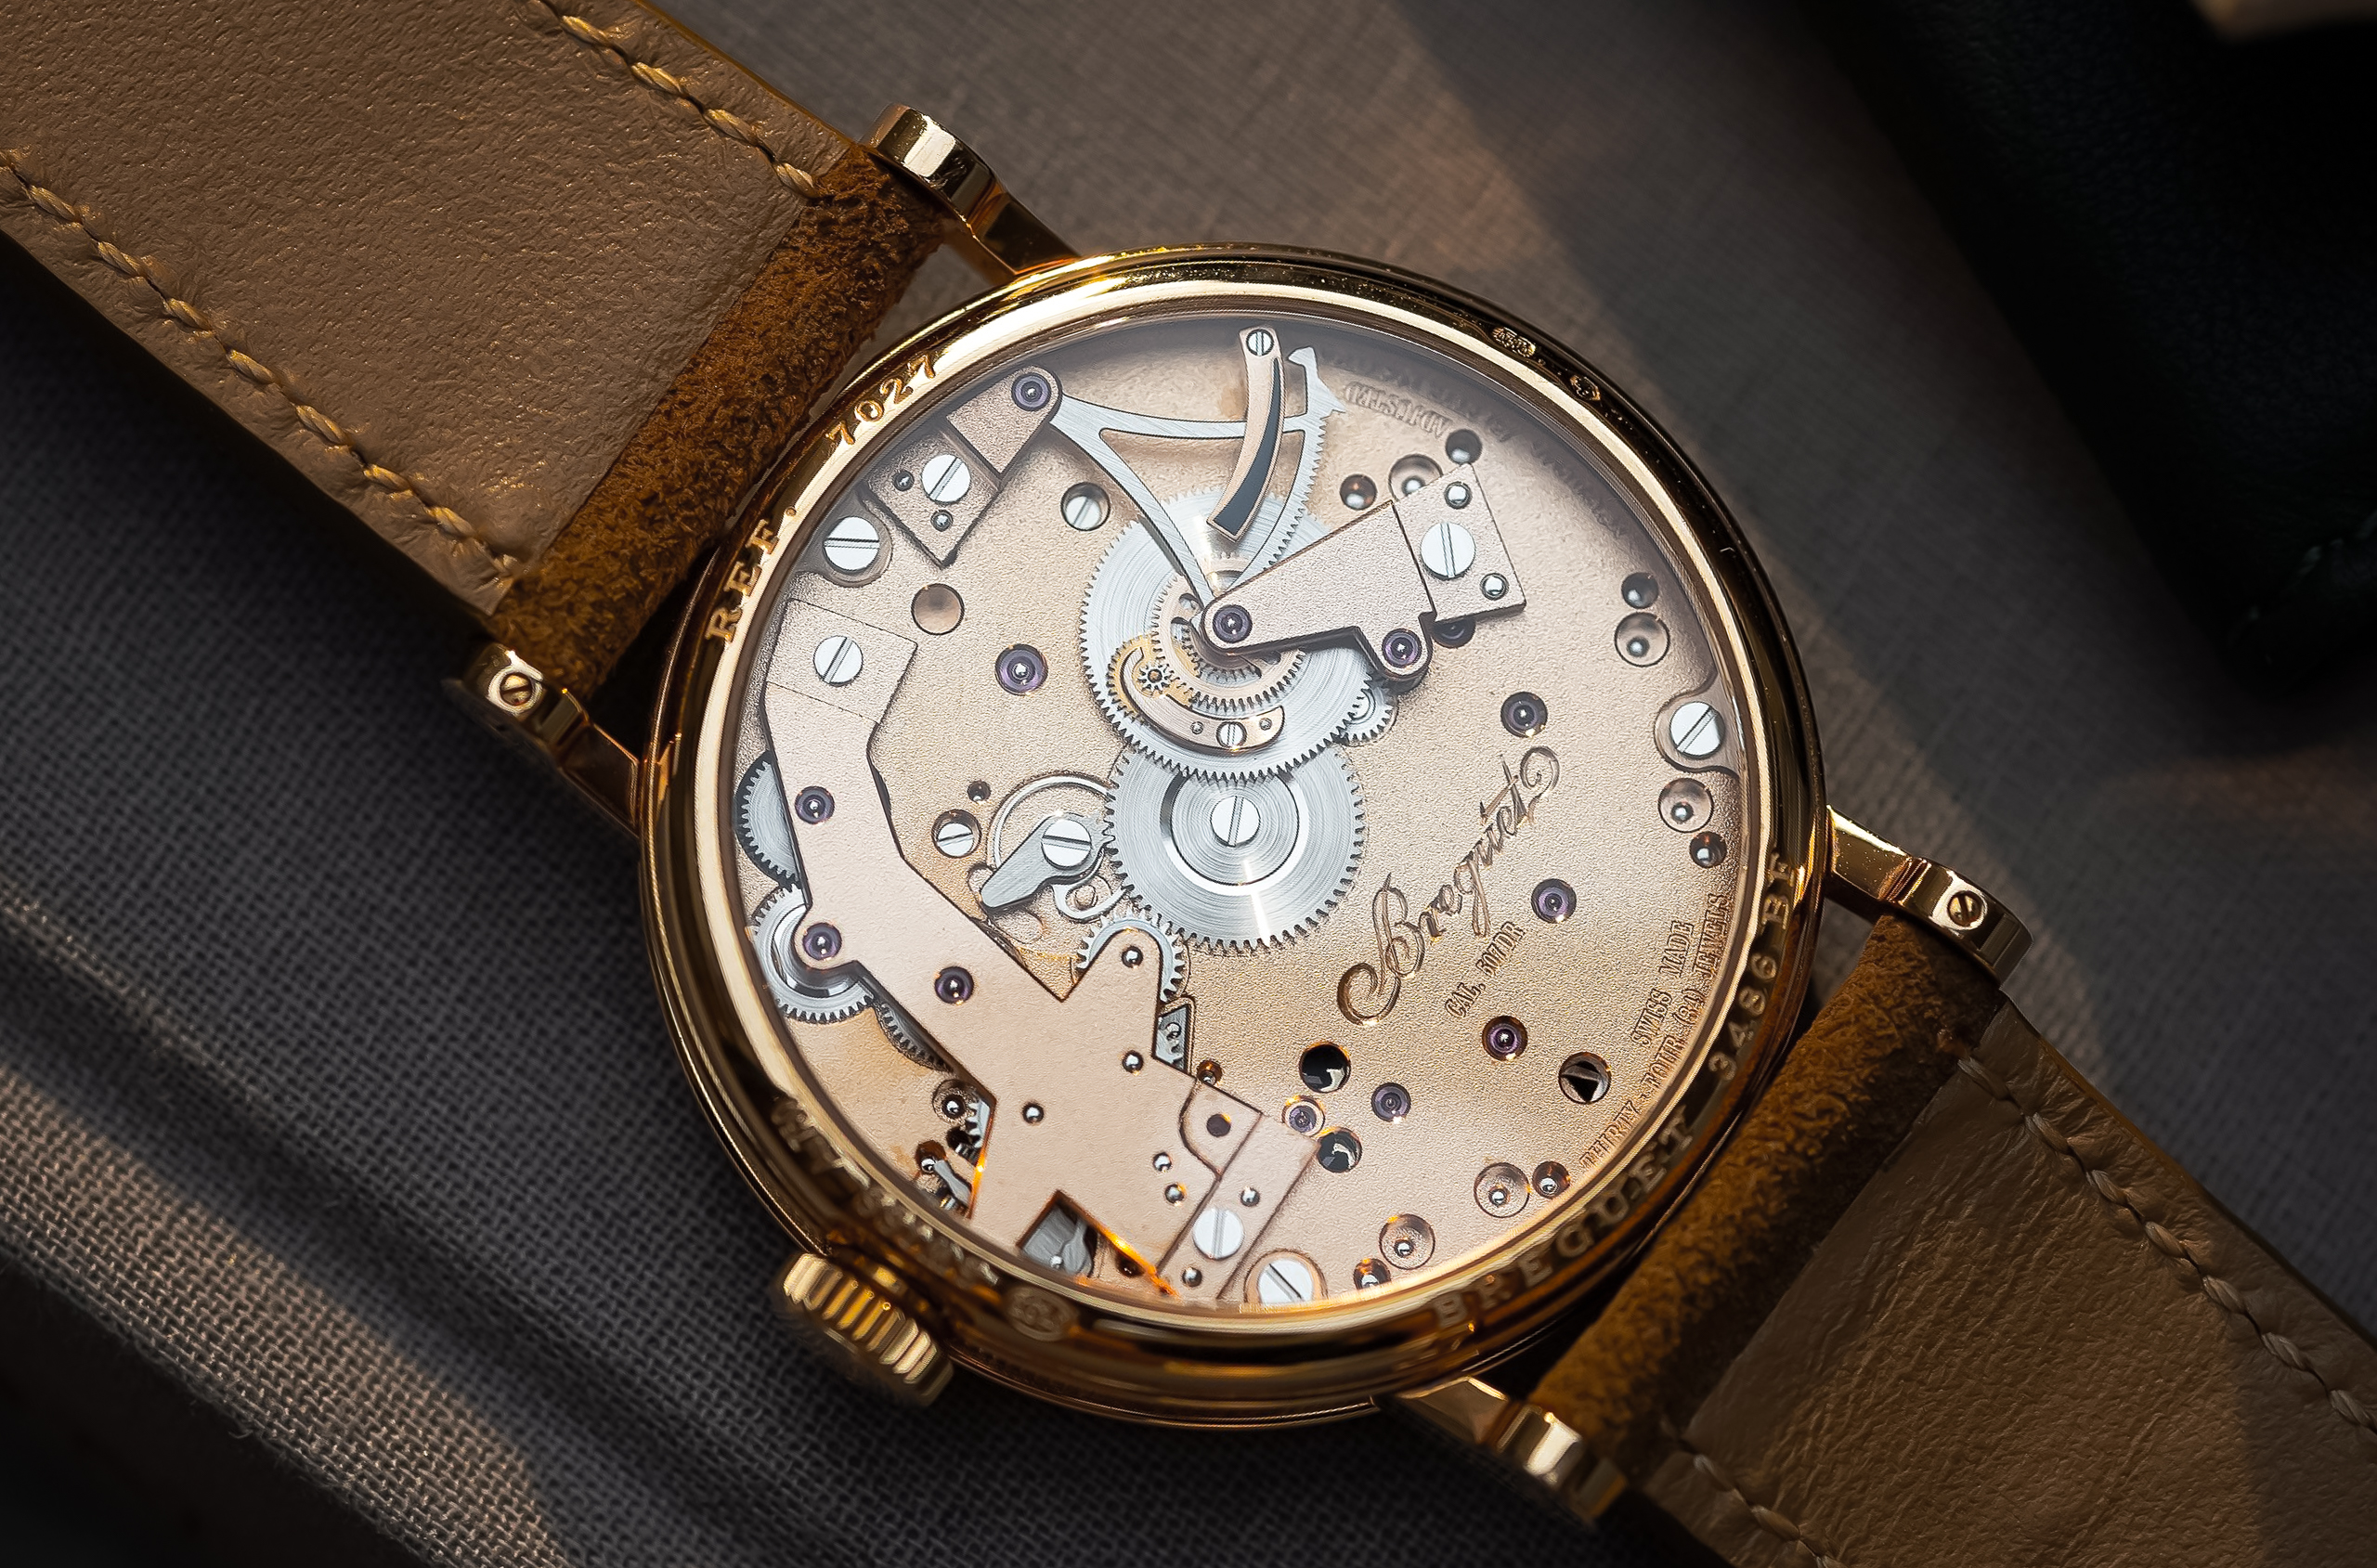 Breguet-7027-Tradition-Rose-Gold